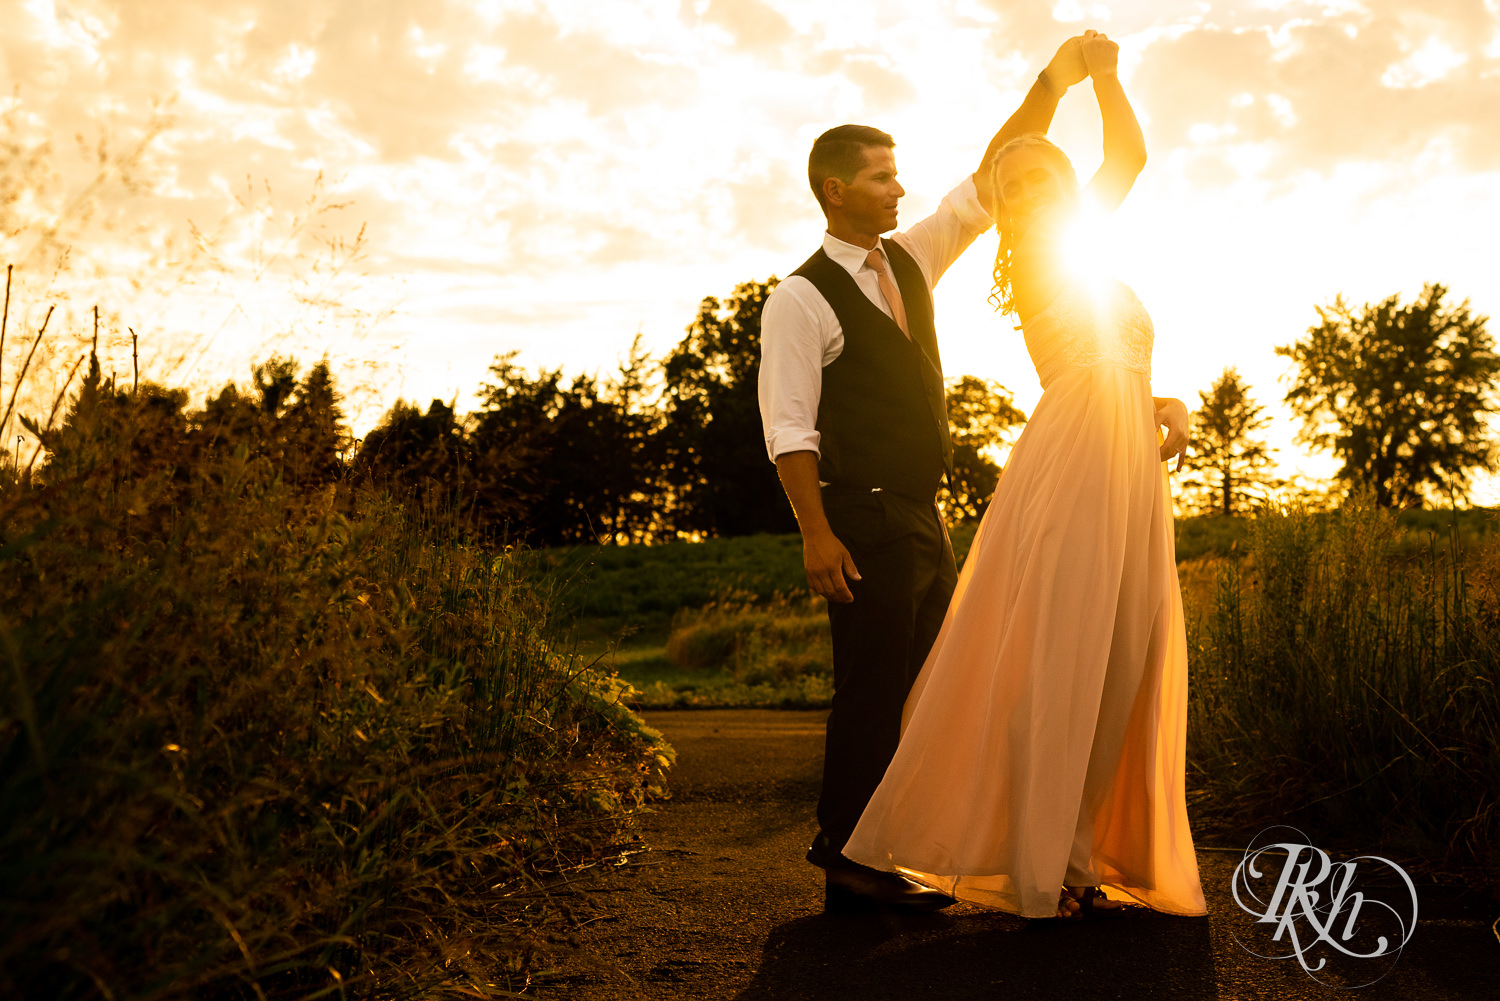 Bride and groom dancing at sunset at The Outpost Center in Chaska, Minnesota.